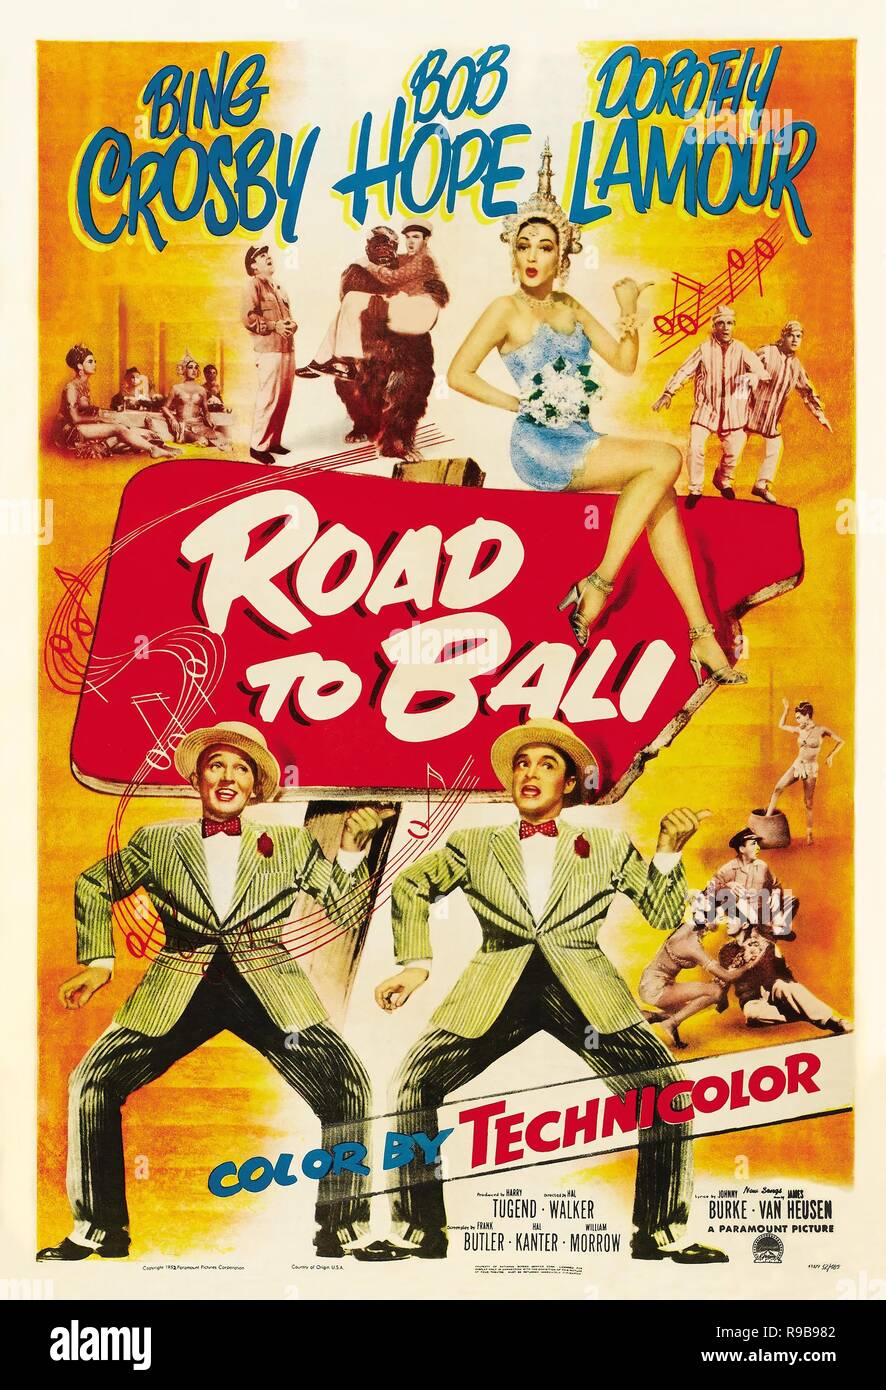 Original film title: ROAD TO BALI. English title: ROAD TO BALI. Year: 1952. Director: HAL WALKER. Credit: PARAMOUNT PICTURES / Album Stock Photo